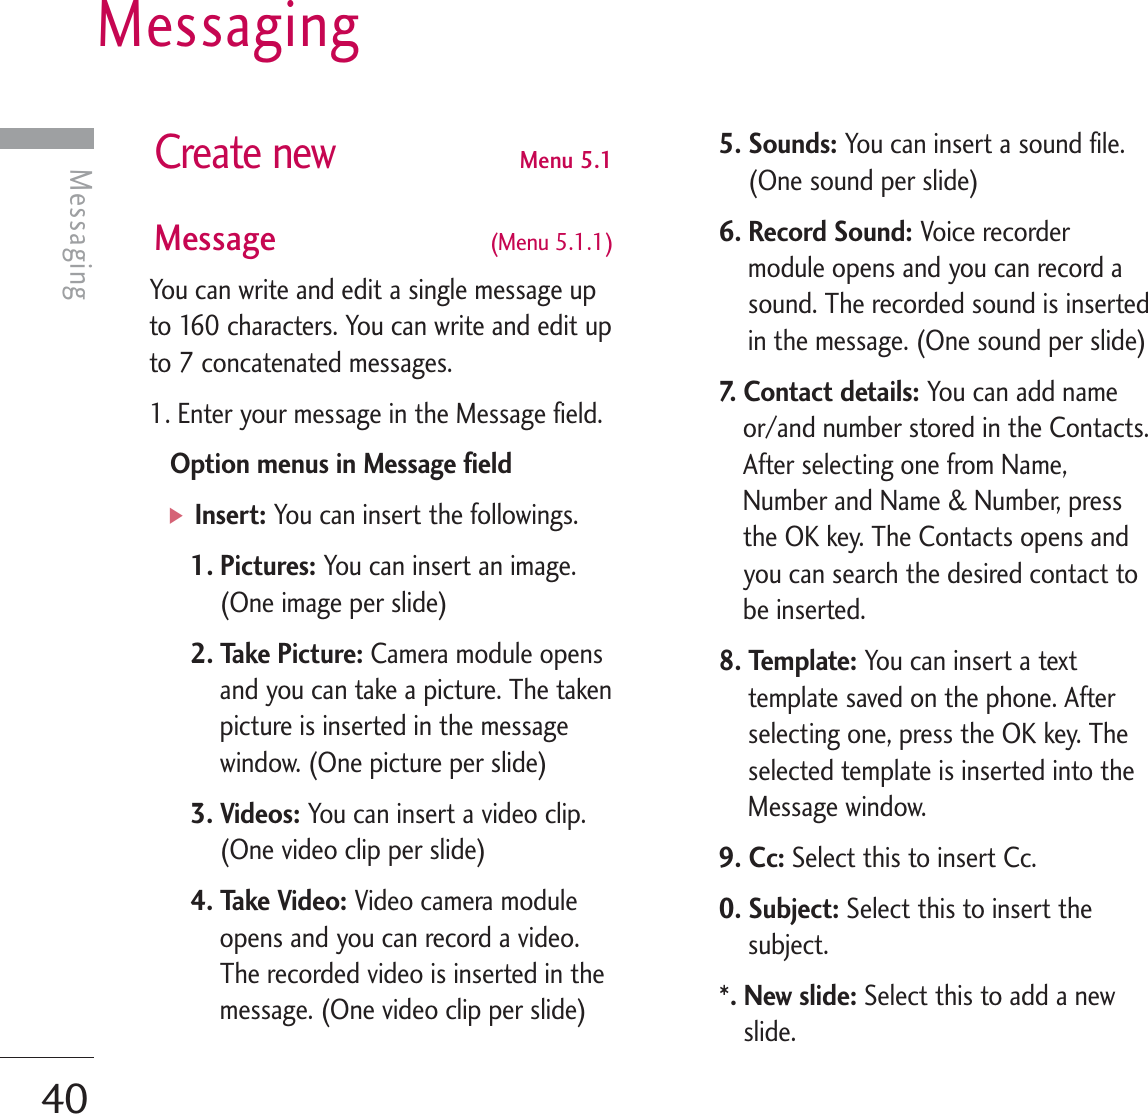 Messaging40MessagingCreate newMenu 5.1Message  (Menu 5.1.1)You can write and edit a single message upto 160 characters. You can write and edit upto 7 concatenated messages.1. Enter your message in the Message field.Option menus in Message field]Insert: You can insert the followings.1. Pictures: You can insert an image.(One image per slide)2. Take Picture: Camera module opensand you can take a picture. The takenpicture is inserted in the messagewindow. (One picture per slide)3. Videos: You can insert a video clip.(One video clip per slide)4. Take Video: Video camera moduleopens and you can record a video.The recorded video is inserted in themessage. (One video clip per slide)5. Sounds: You can insert a sound file.(One sound per slide)6. Record Sound: Voice recordermodule opens and you can record asound. The recorded sound is insertedin the message. (One sound per slide)7. Contact details: You can add nameor/and number stored in the Contacts.After selecting one from Name,Number and Name &amp; Number, pressthe OK key. The Contacts opens andyou can search the desired contact tobe inserted.8. Template: You can insert a texttemplate saved on the phone. Afterselecting one, press the OK key. Theselected template is inserted into theMessage window.9. Cc: Select this to insert Cc.0. Subject: Select this to insert thesubject.*. New slide: Select this to add a newslide.